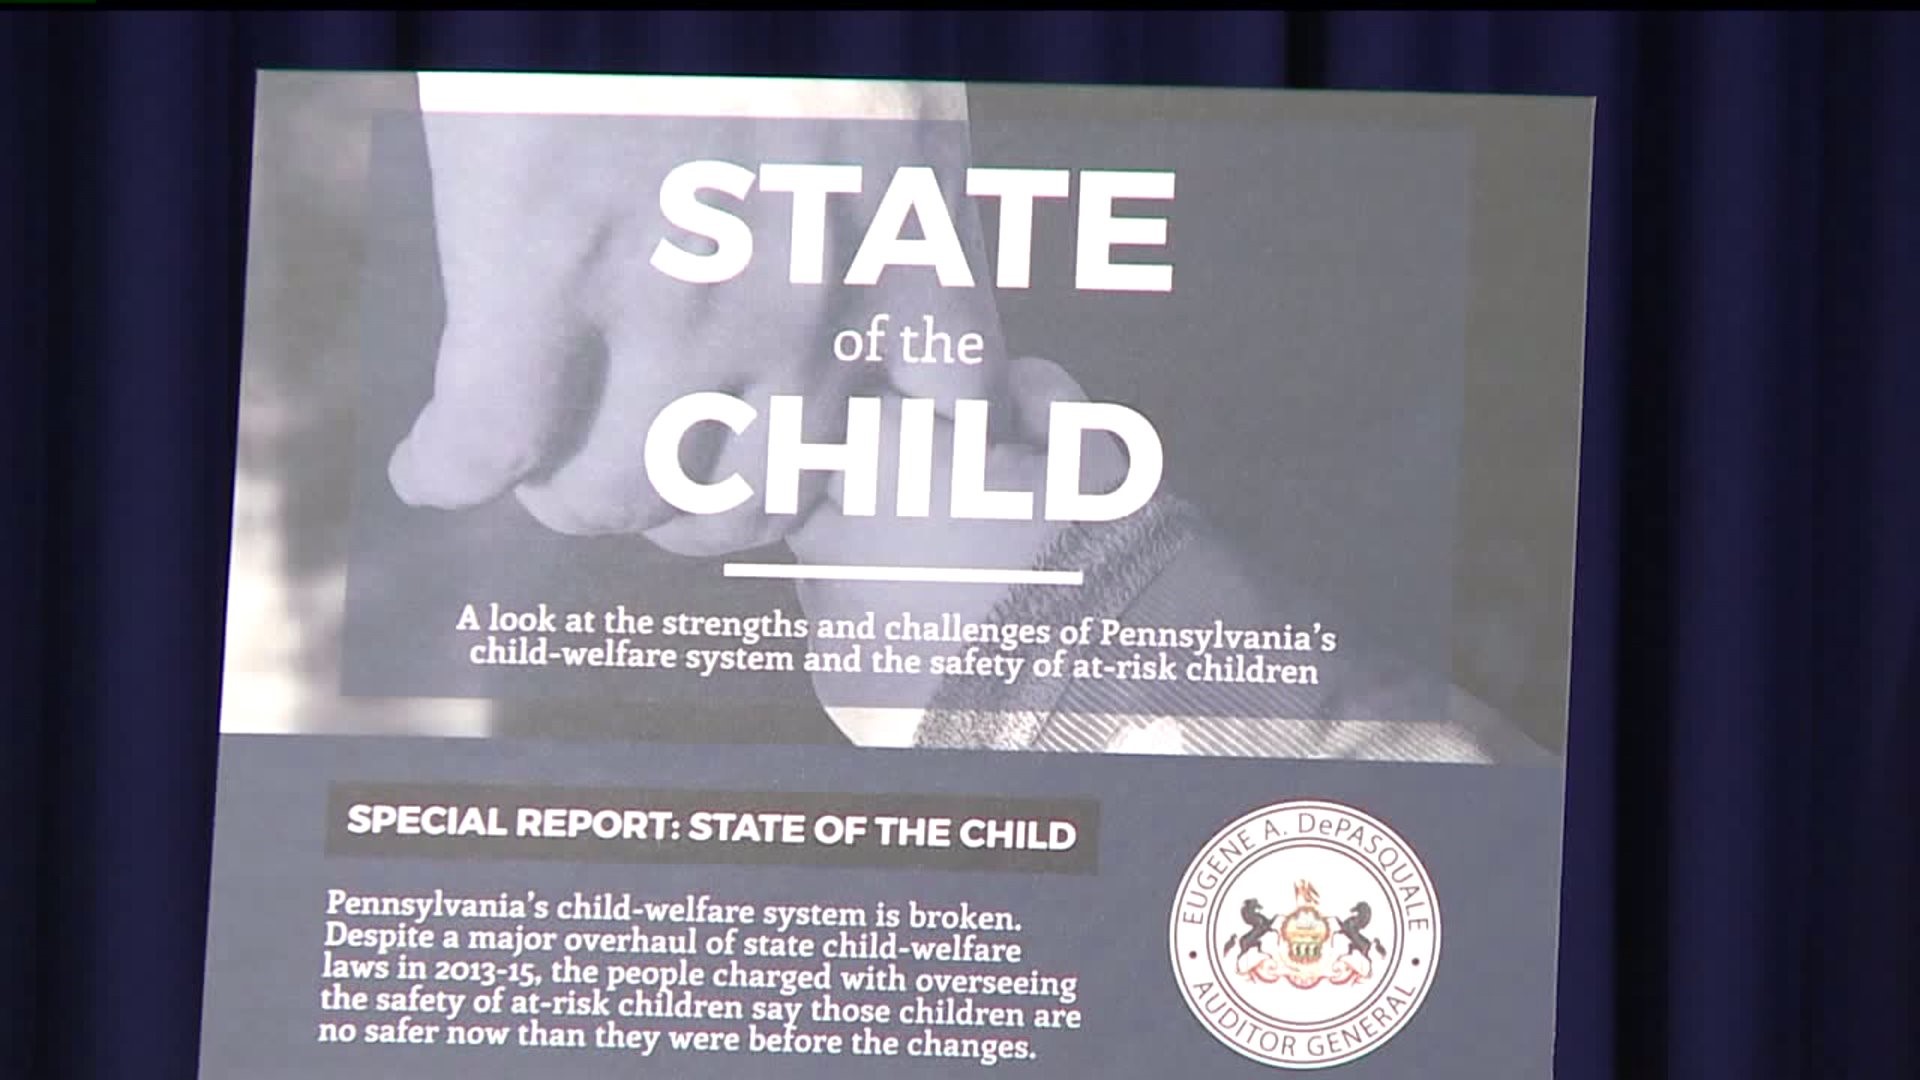 PA Auditor General addresses the child welfare system